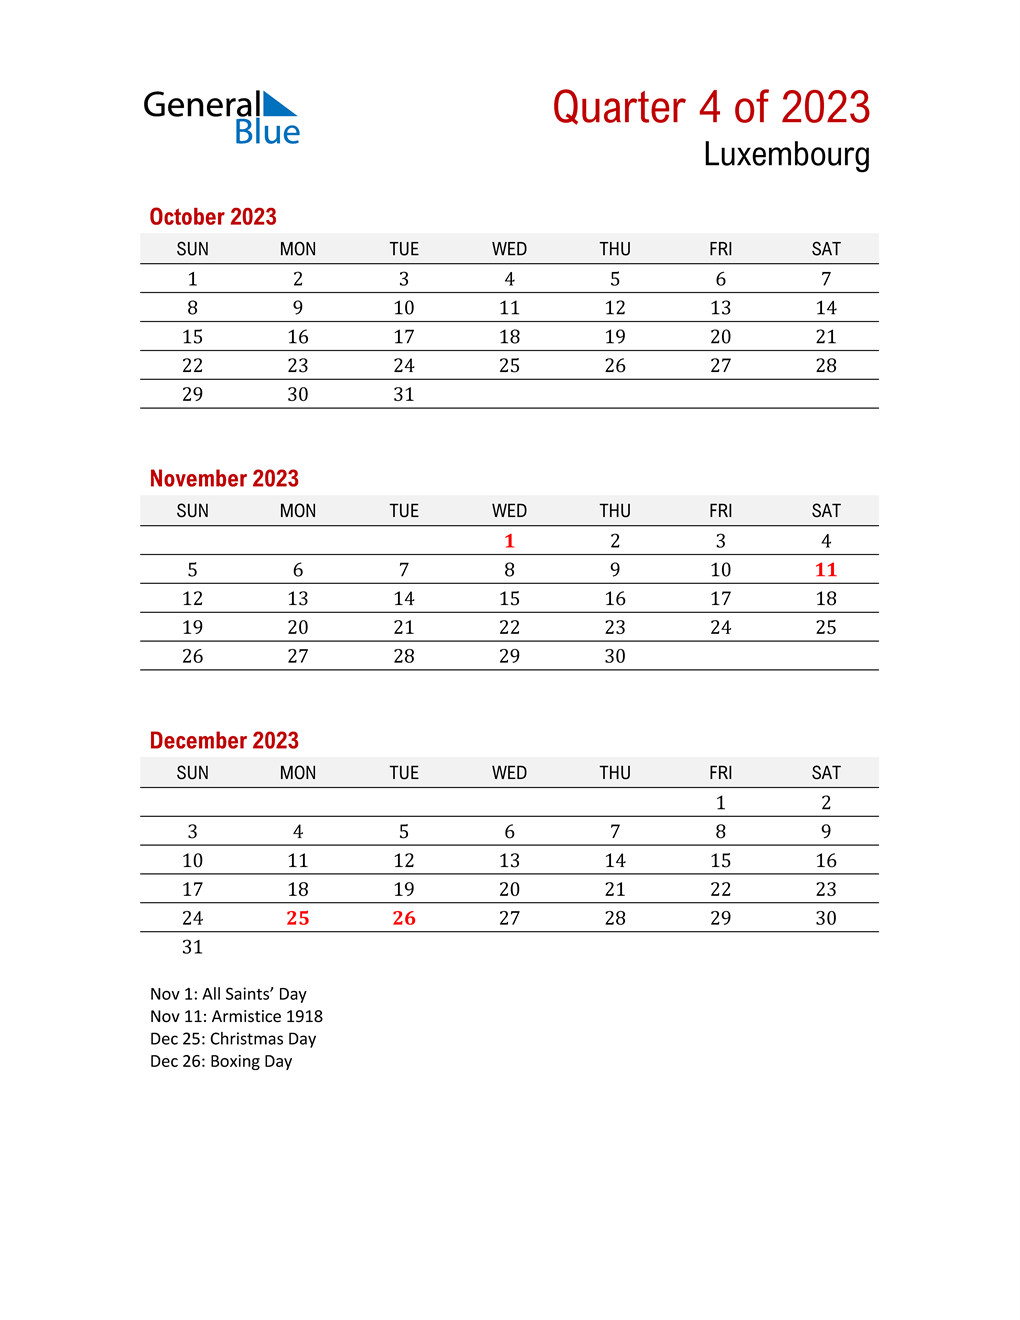  Printable Three Month Calendar for Luxembourg